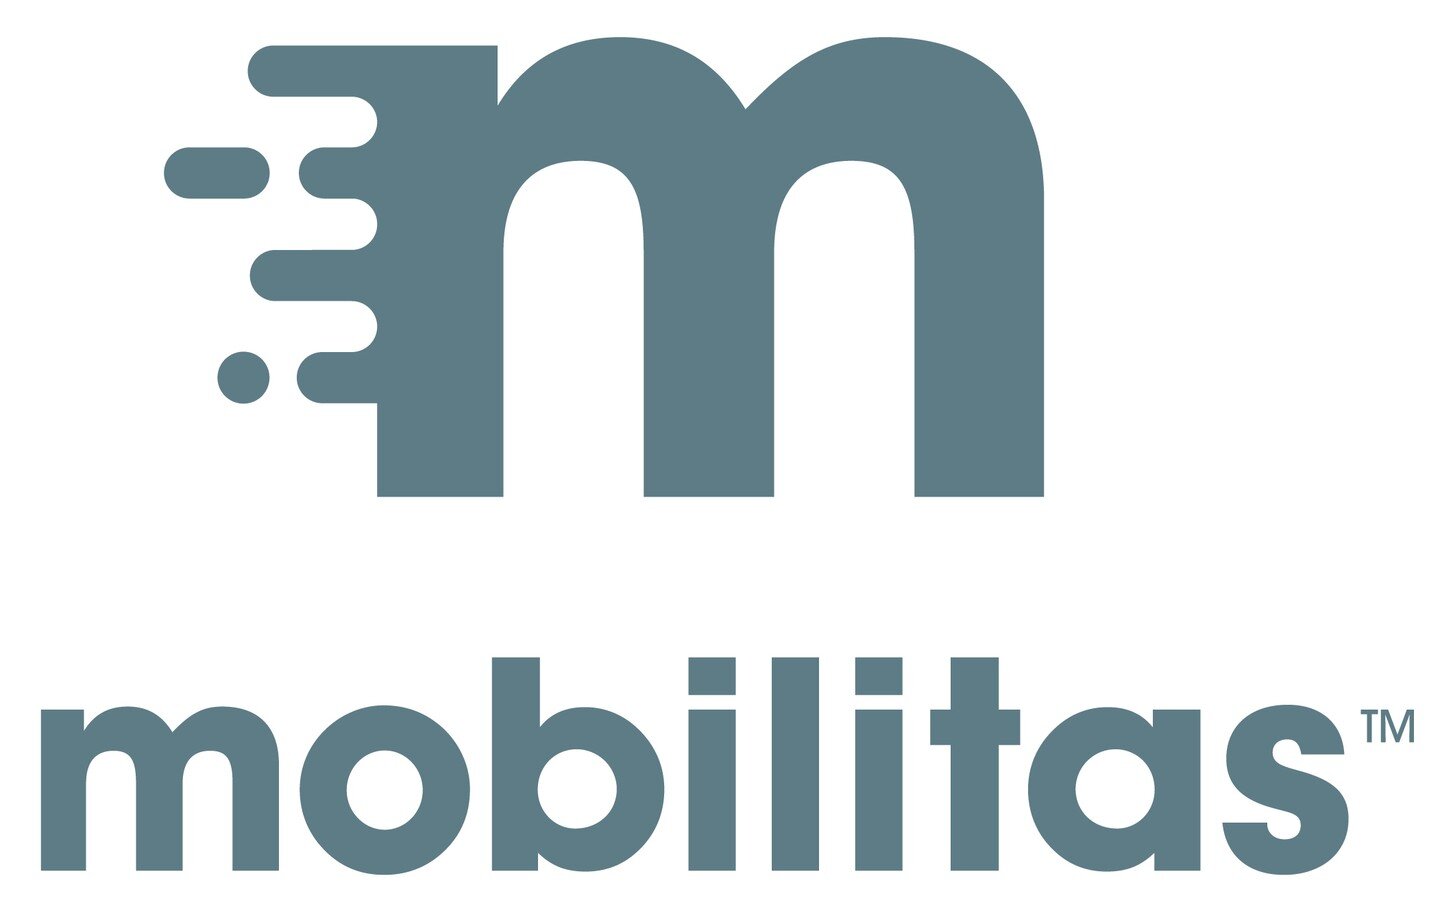 Tomorrow is the big day! We get to show the world what Betty can do at the @indyachallenge presented by @cisco at the @txmotorspeedway , we would like to take today to recognize @mobilitas_ , one of our major sponsors!

We would never have made it to